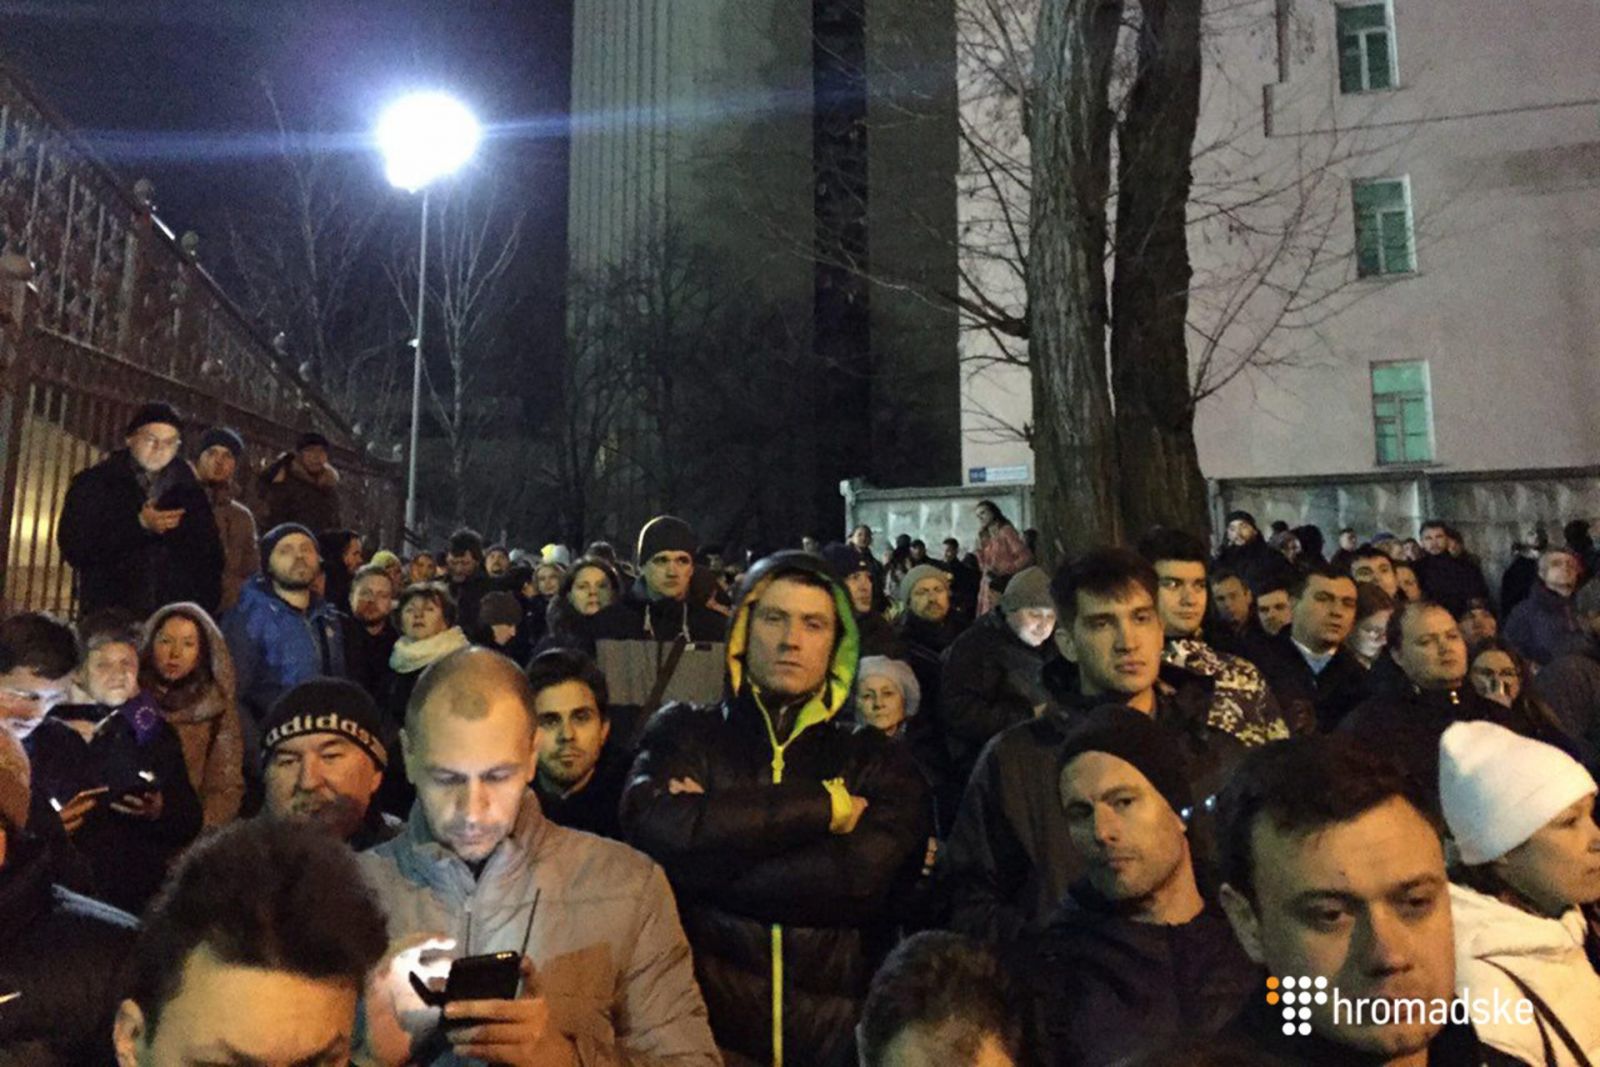 On Sunday March 5, activists gathered near the court to prevent Nasirov from escaping. Photo: screenshot from hromadske.tv